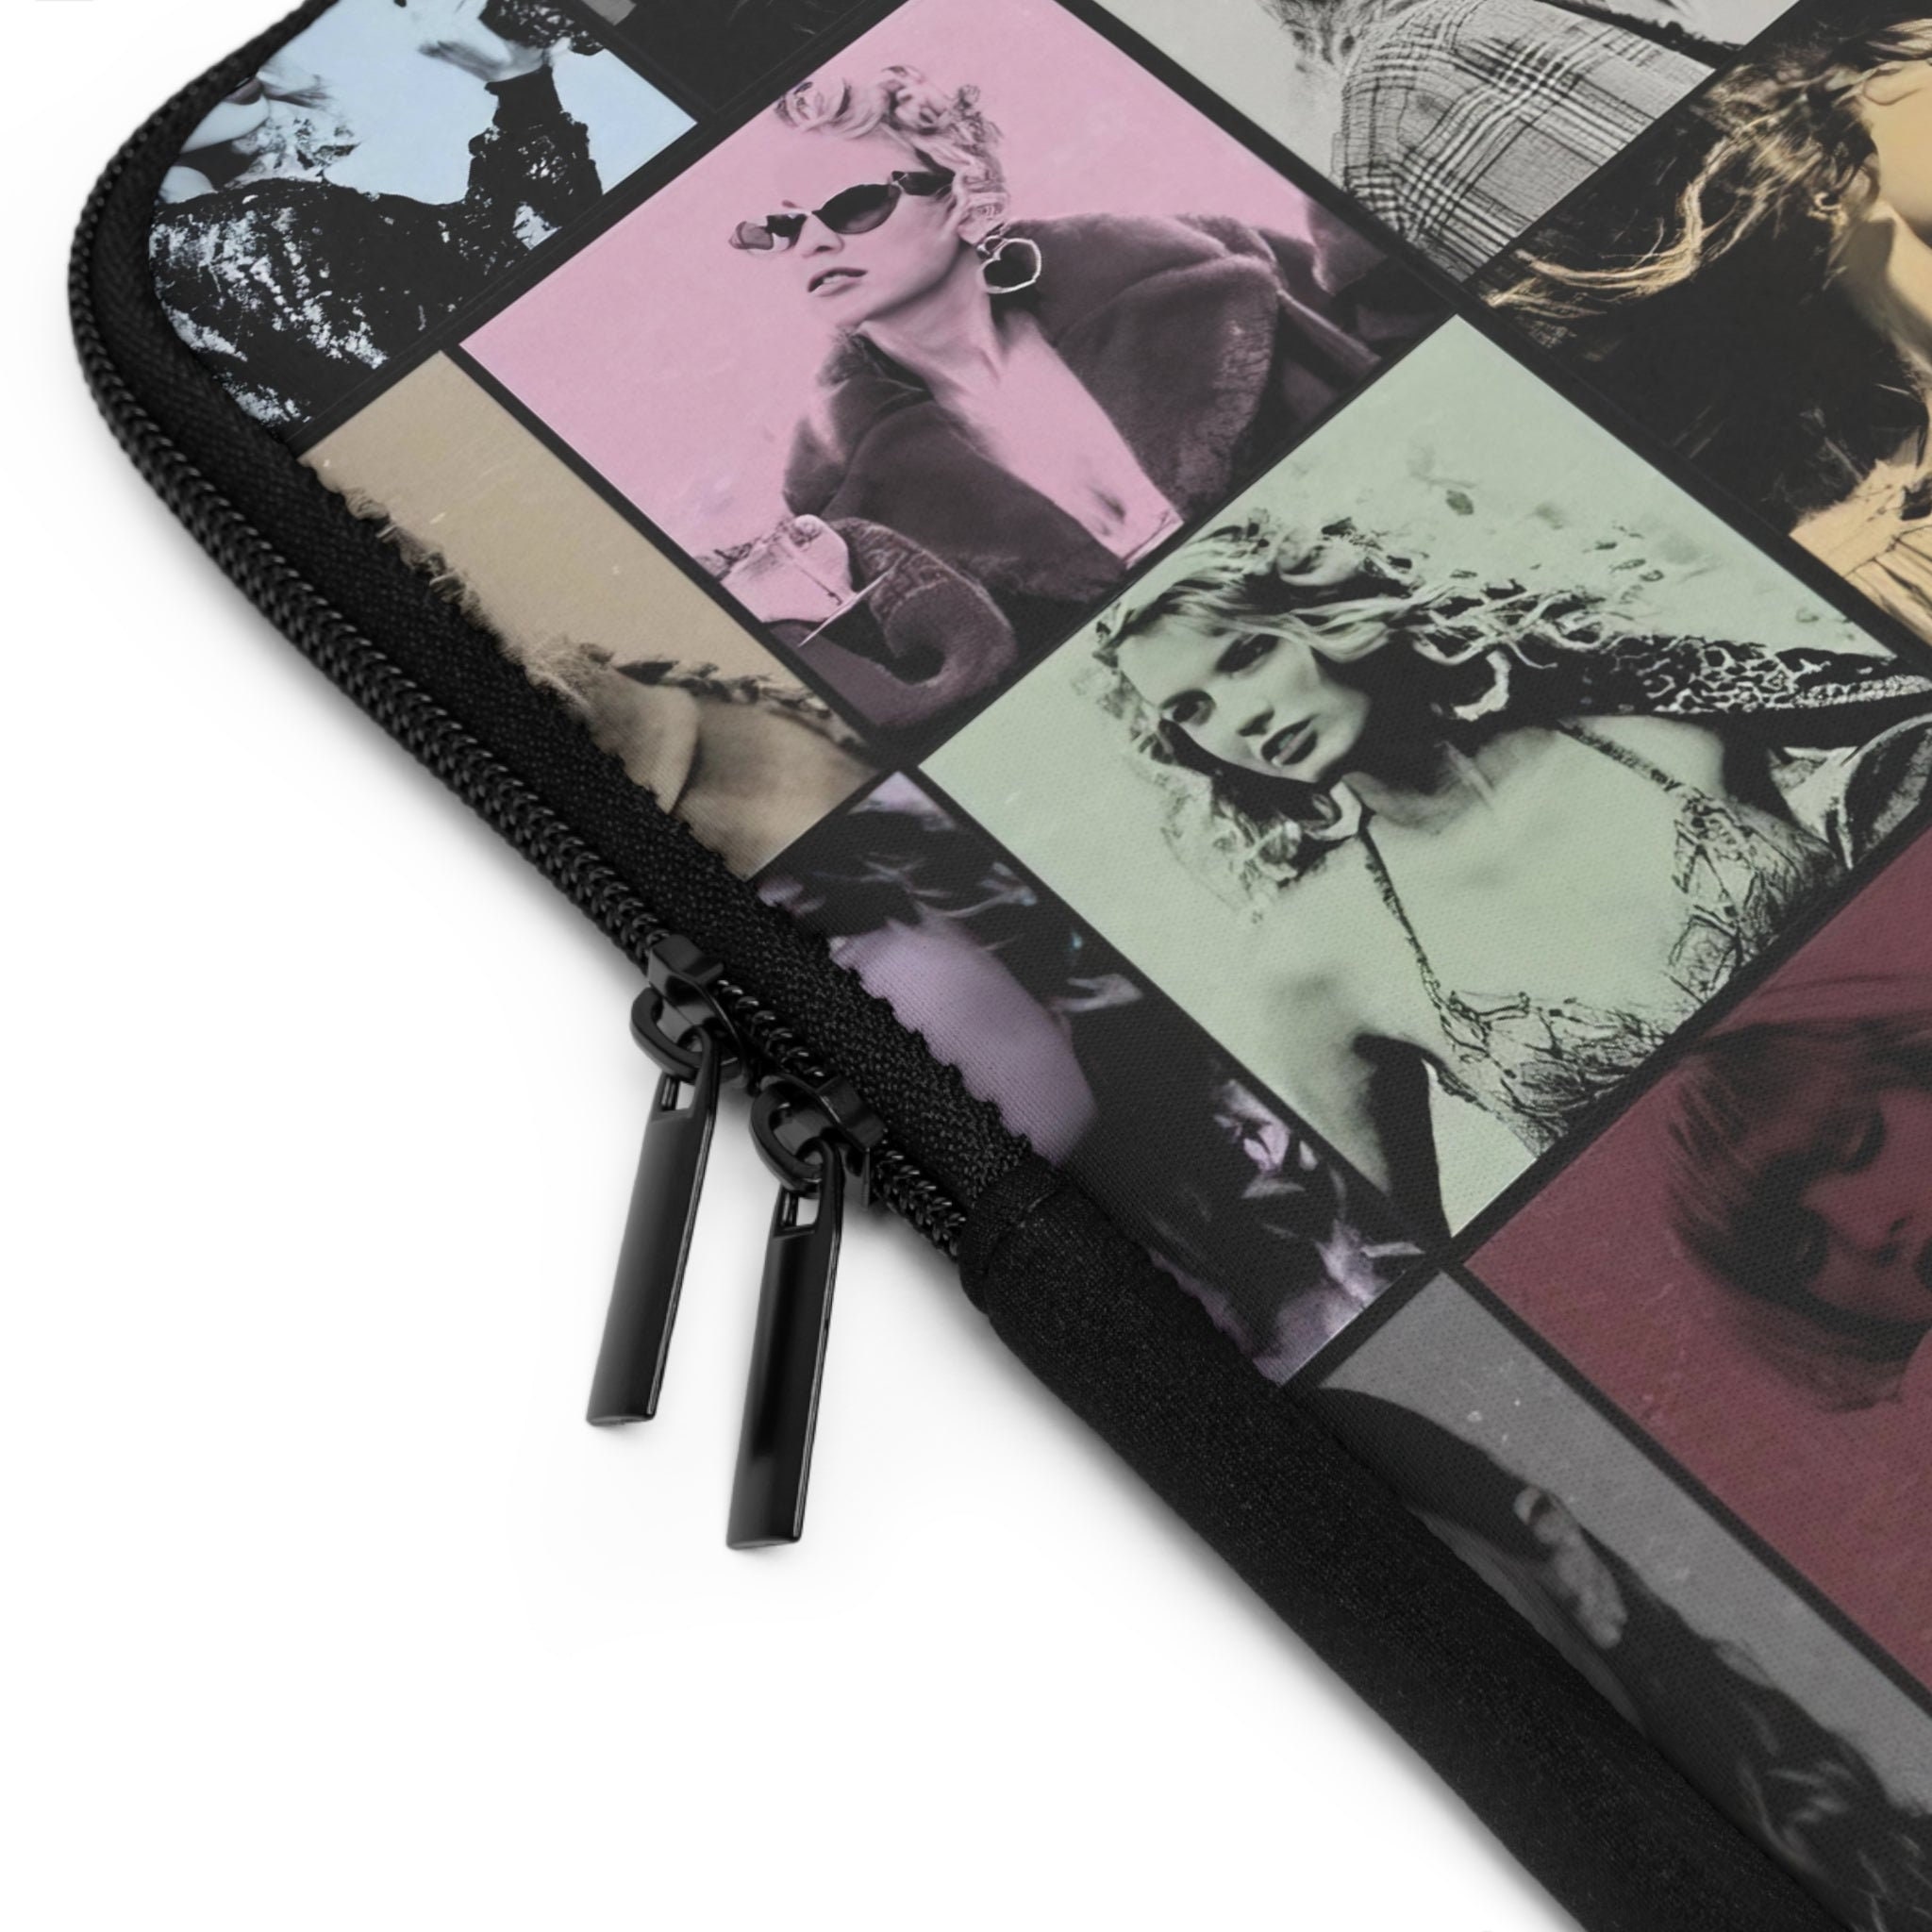 Discover Taylor Eras Collage Laptop Sleeve